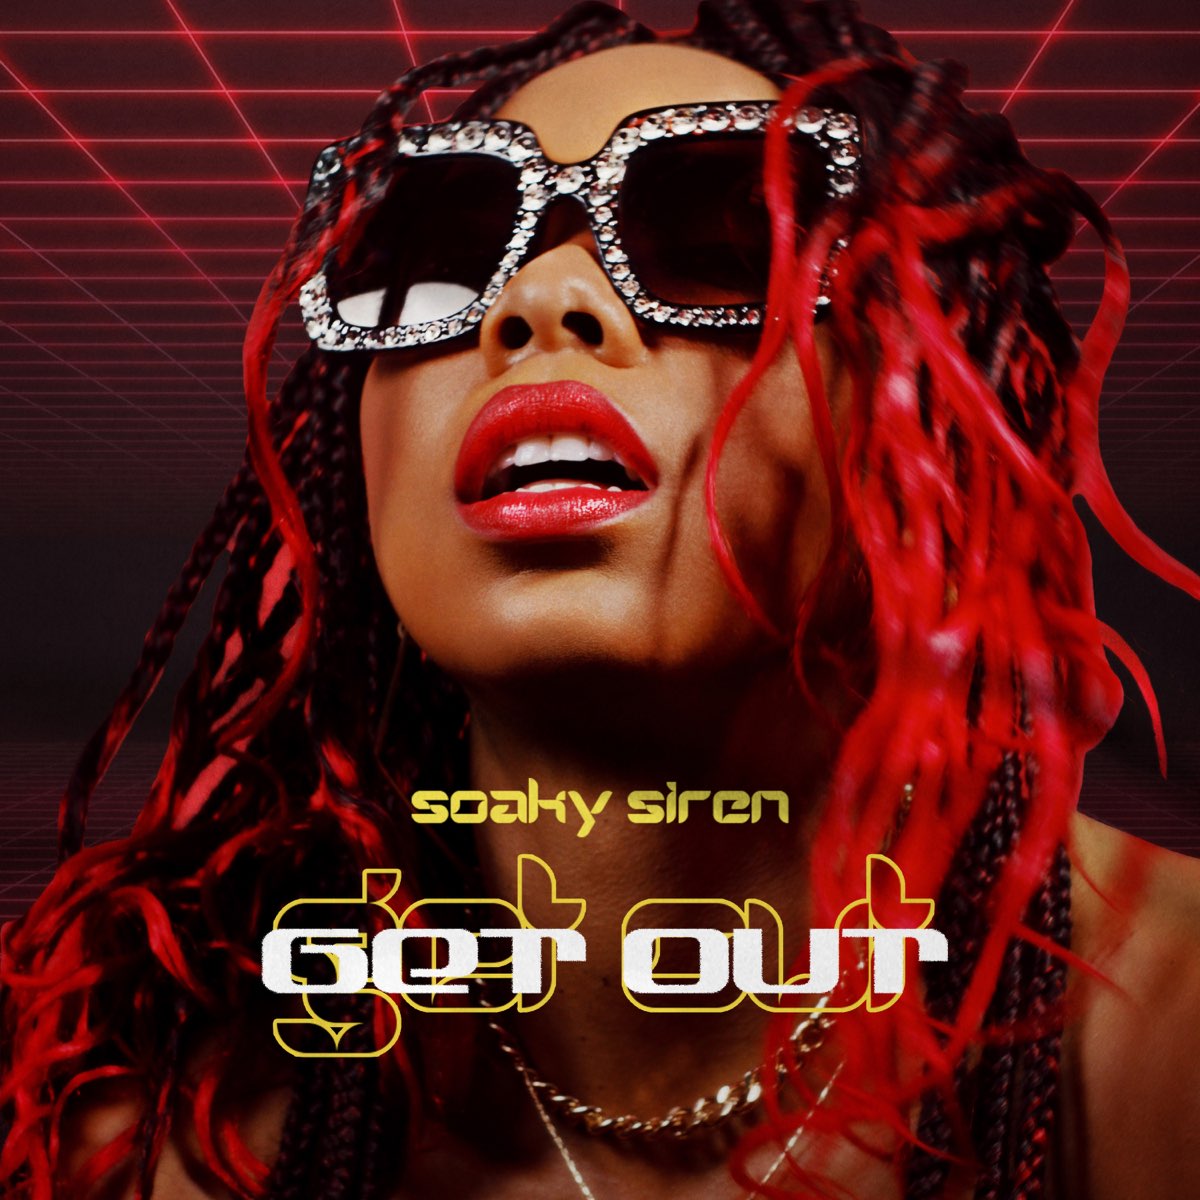 Soaky Siren — Get Out cover artwork